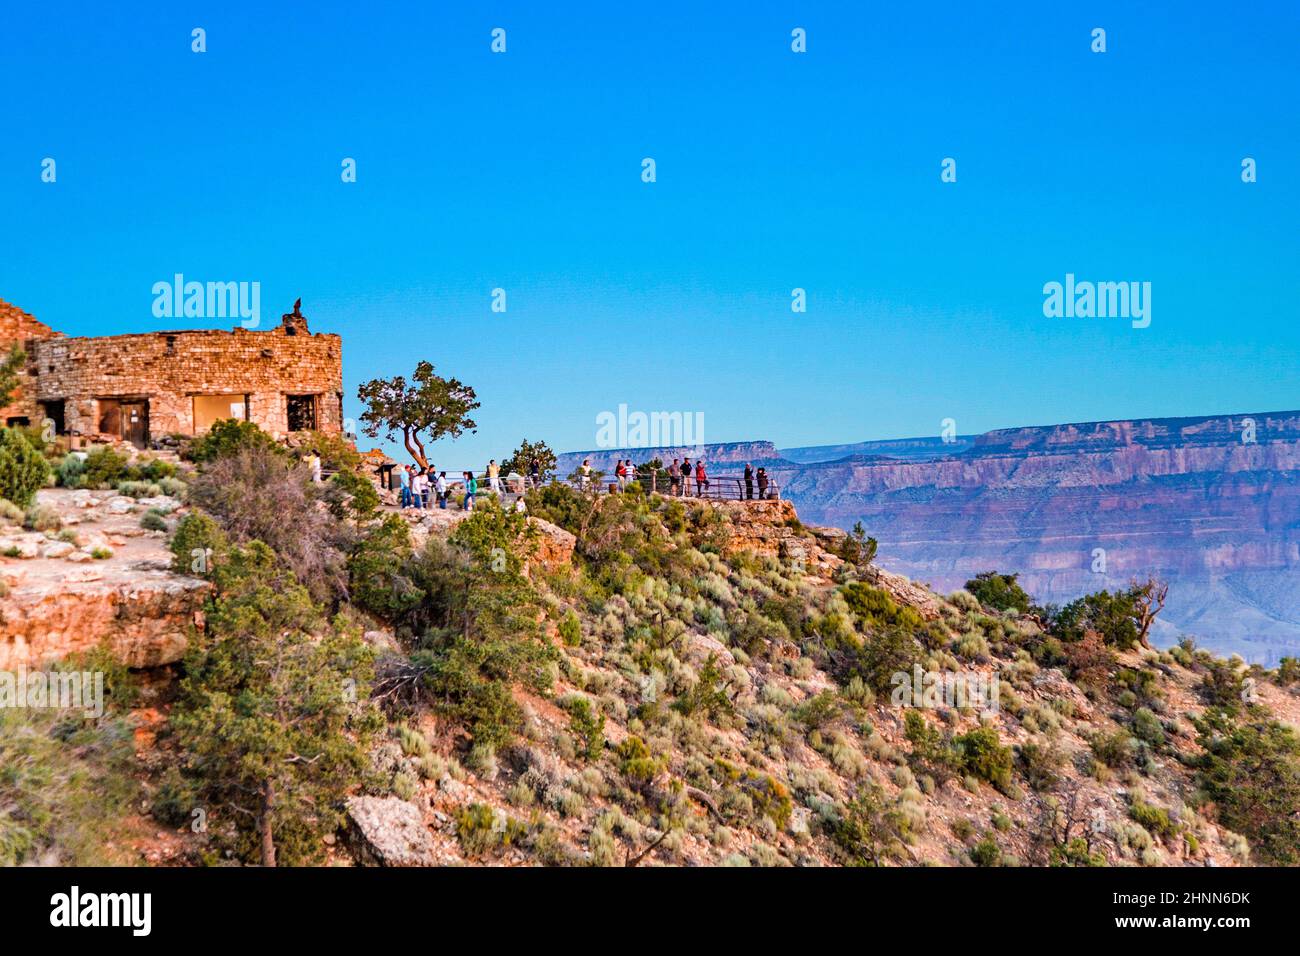 people enjoy the view from Yaki point to the Grand canyon valley with river Colorado Stock Photo